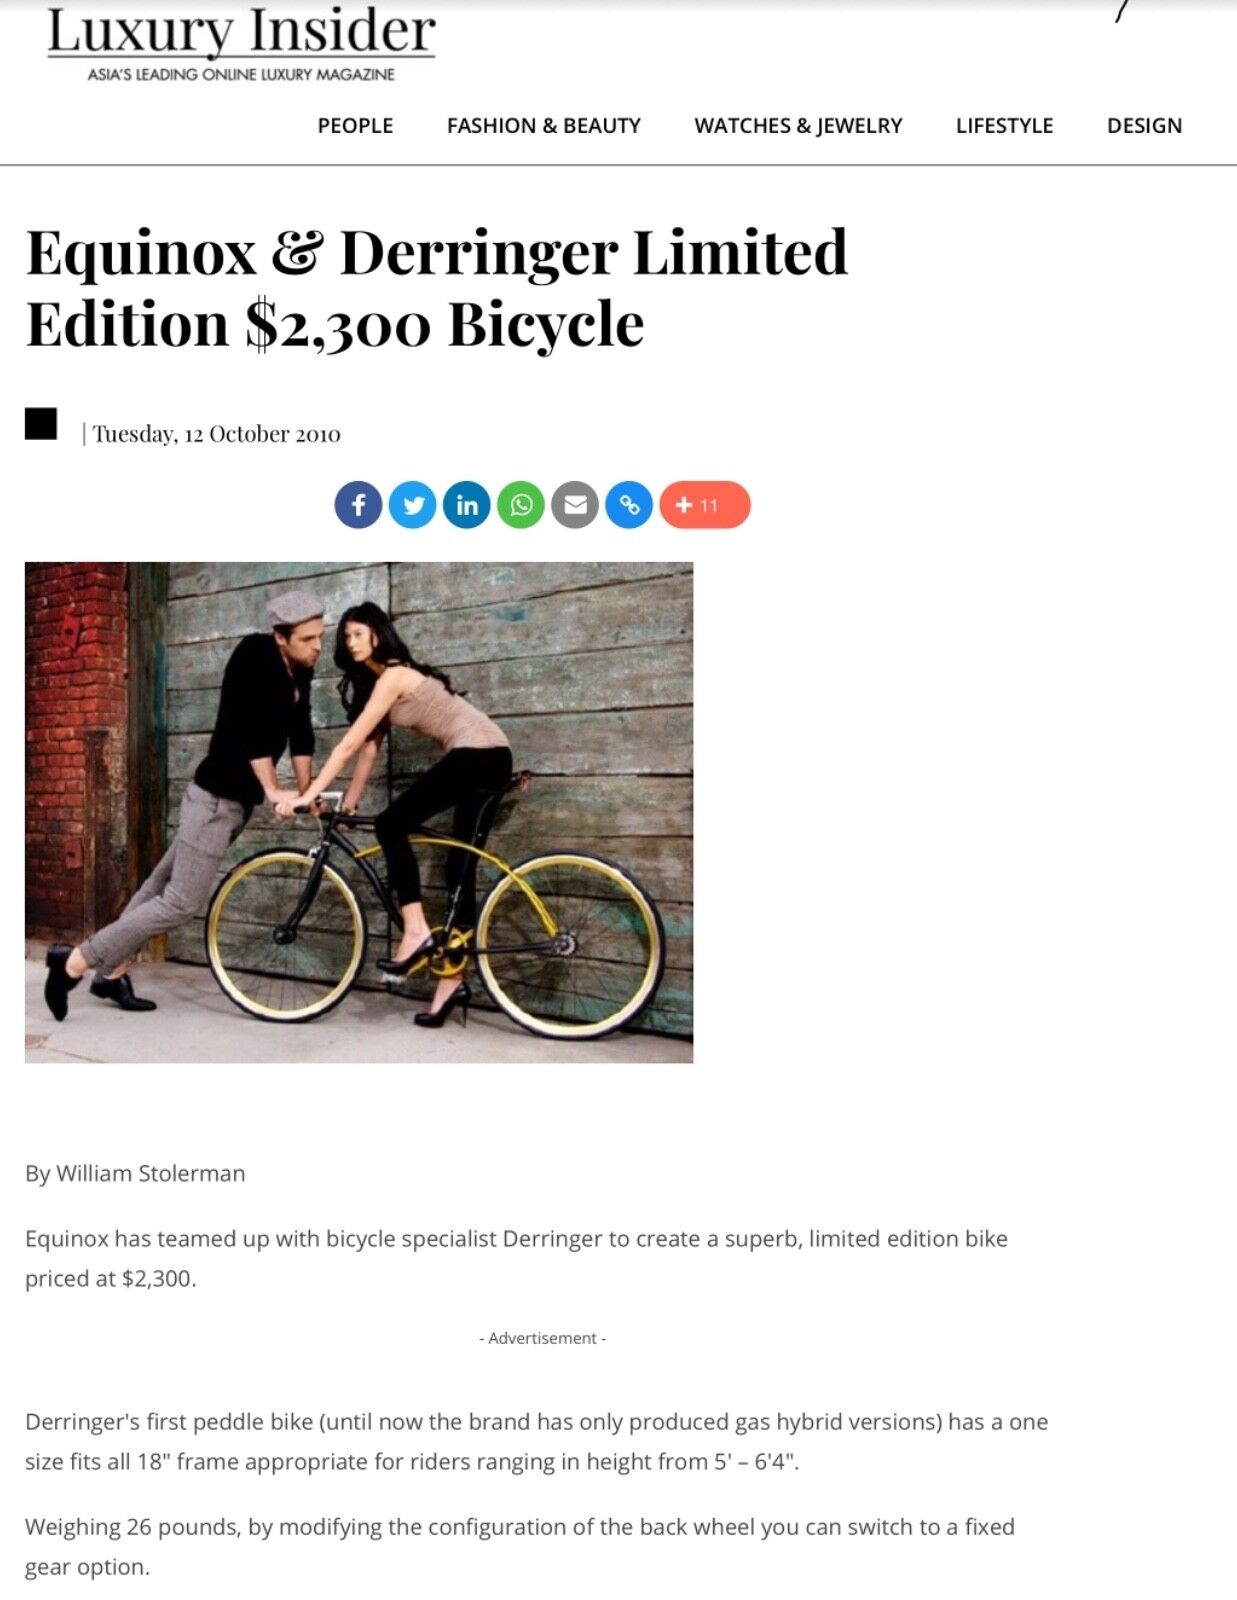 ULTIMATE LUXURY Equinox & Derringer Limited Edition Bicycle: RETAILED $2300